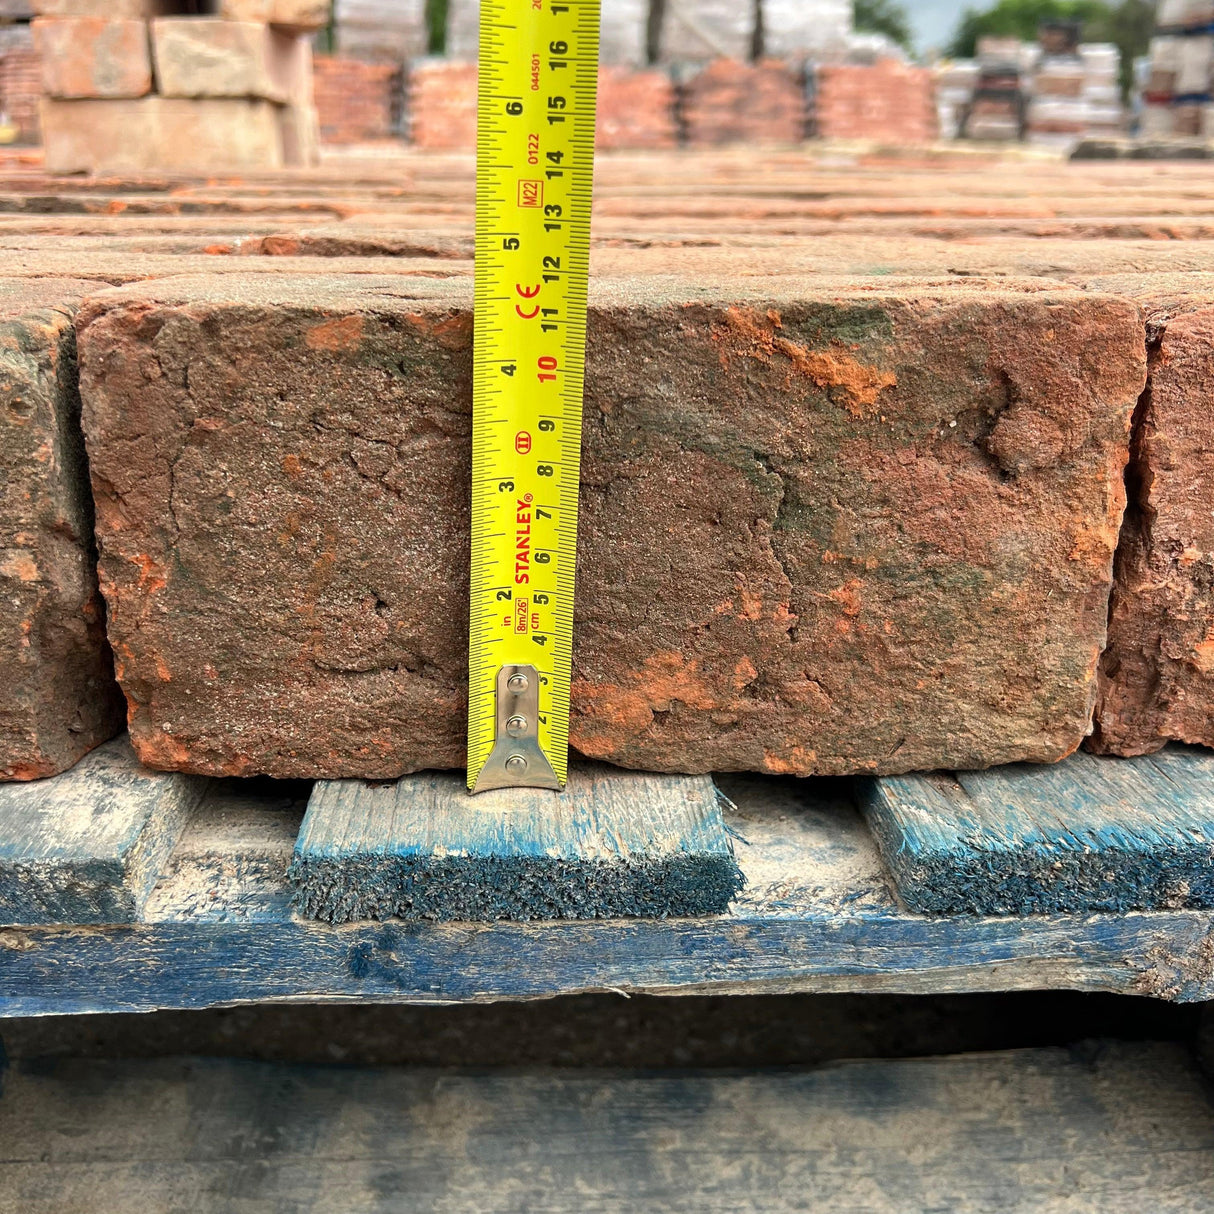 68mm Weathered Imperial Brick - Reclaimed Brick Company